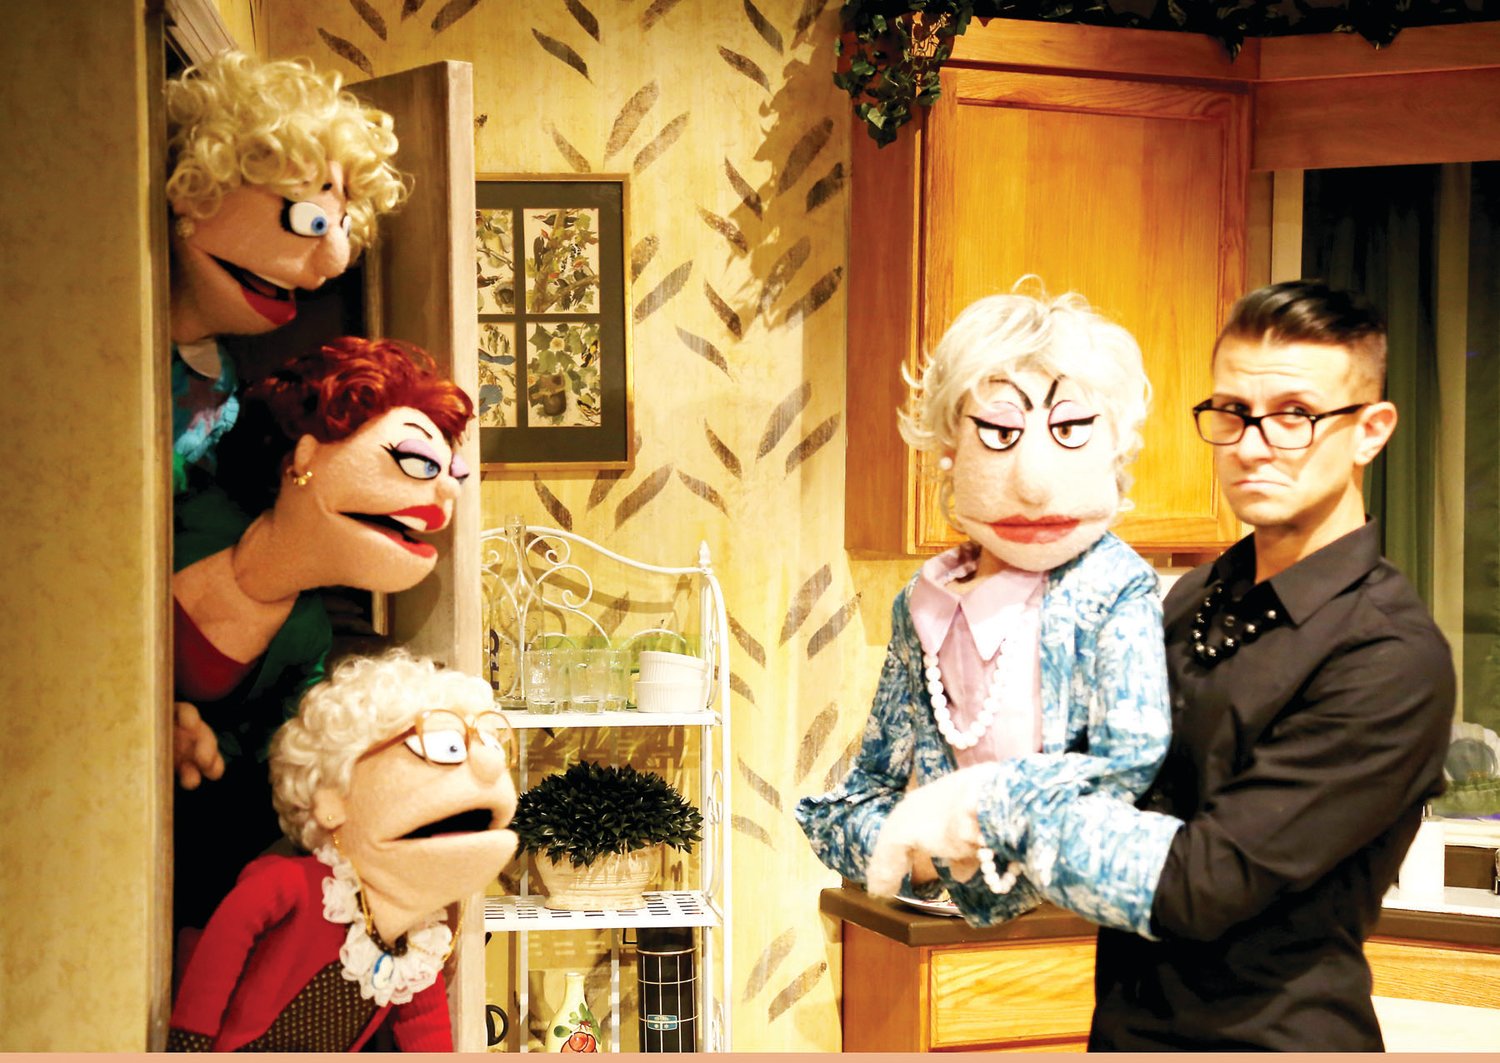 A scene from “That Golden Girls Show,” a parody of classic moments from the TV show, with puppets.